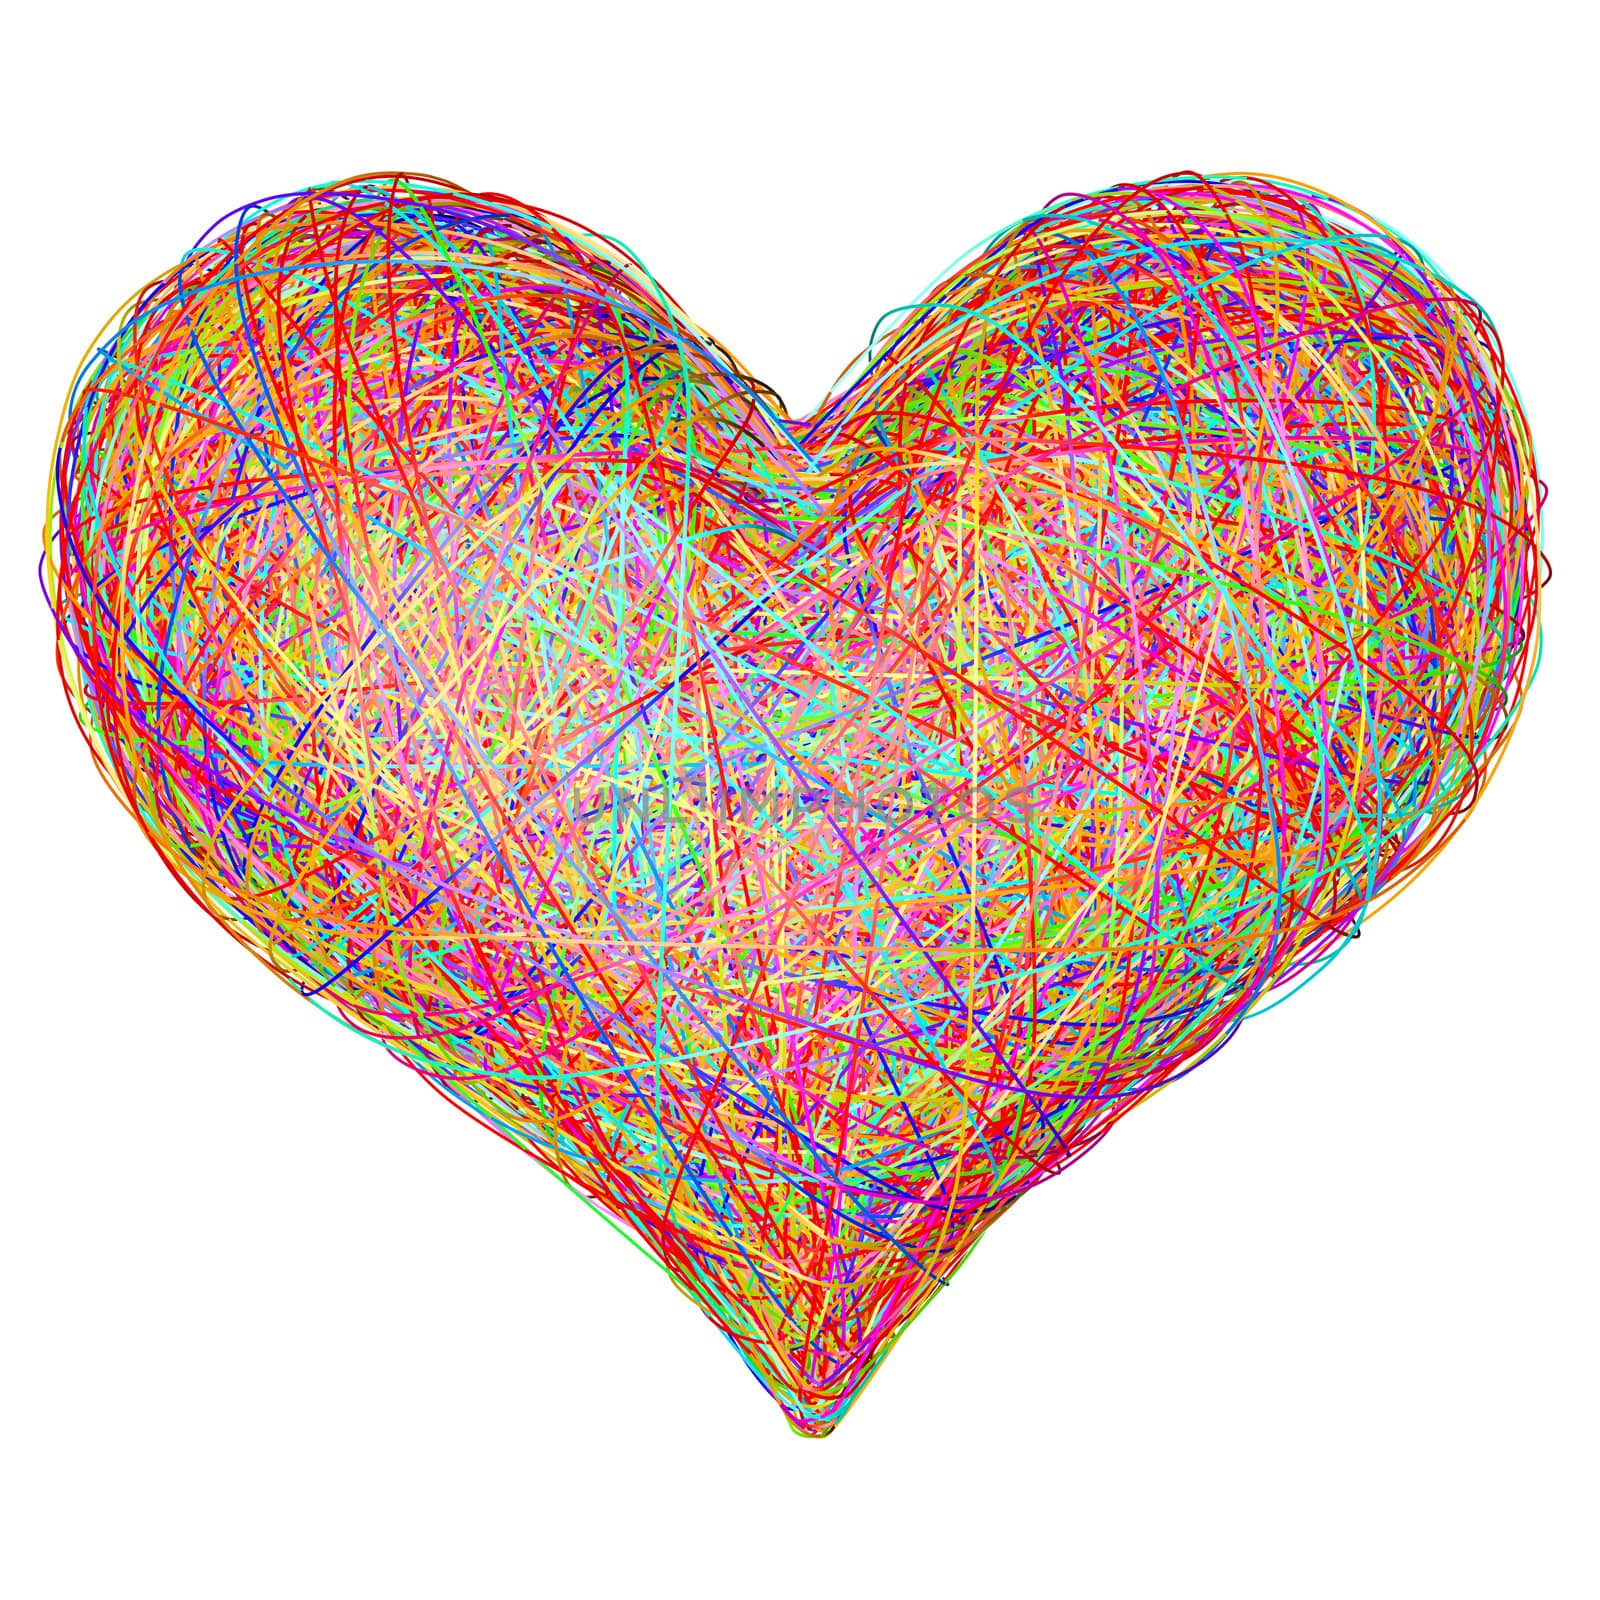 Heart shape composed of colorful striplines by oneo